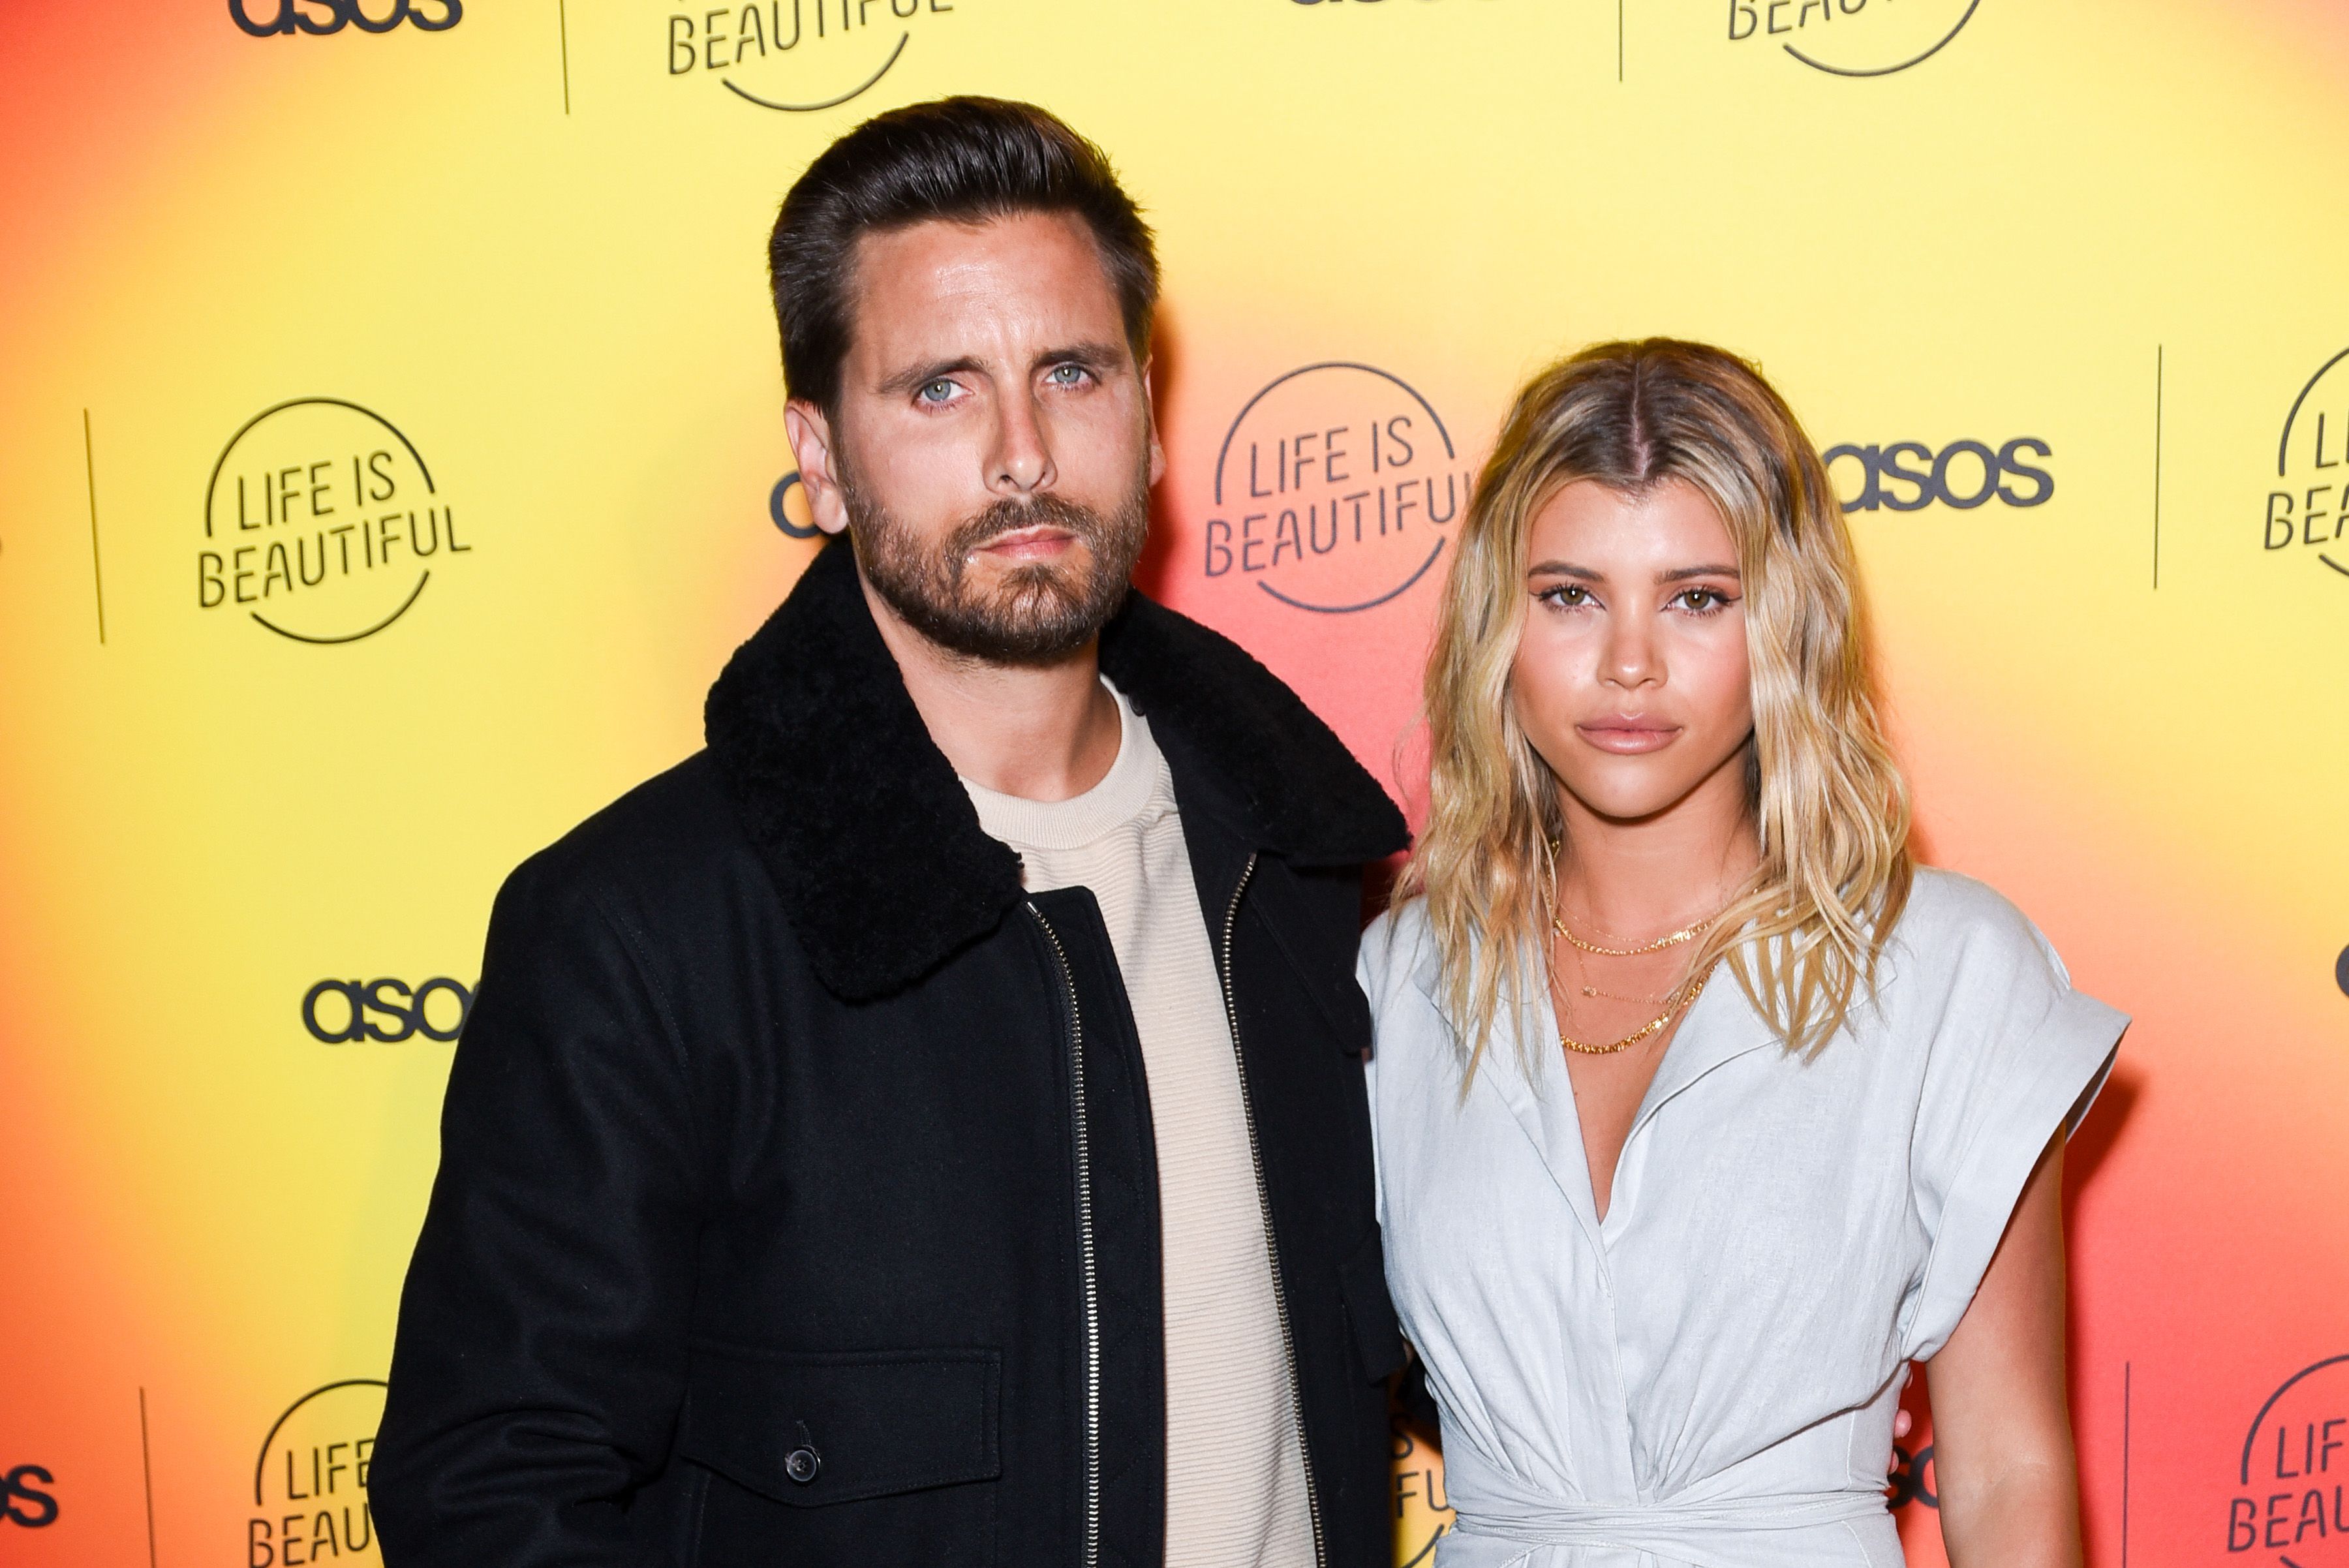 Scott Disick and Sofia Richie at a Life Is Beautiful event in 2019 in Los Angeles | Source: Getty Images